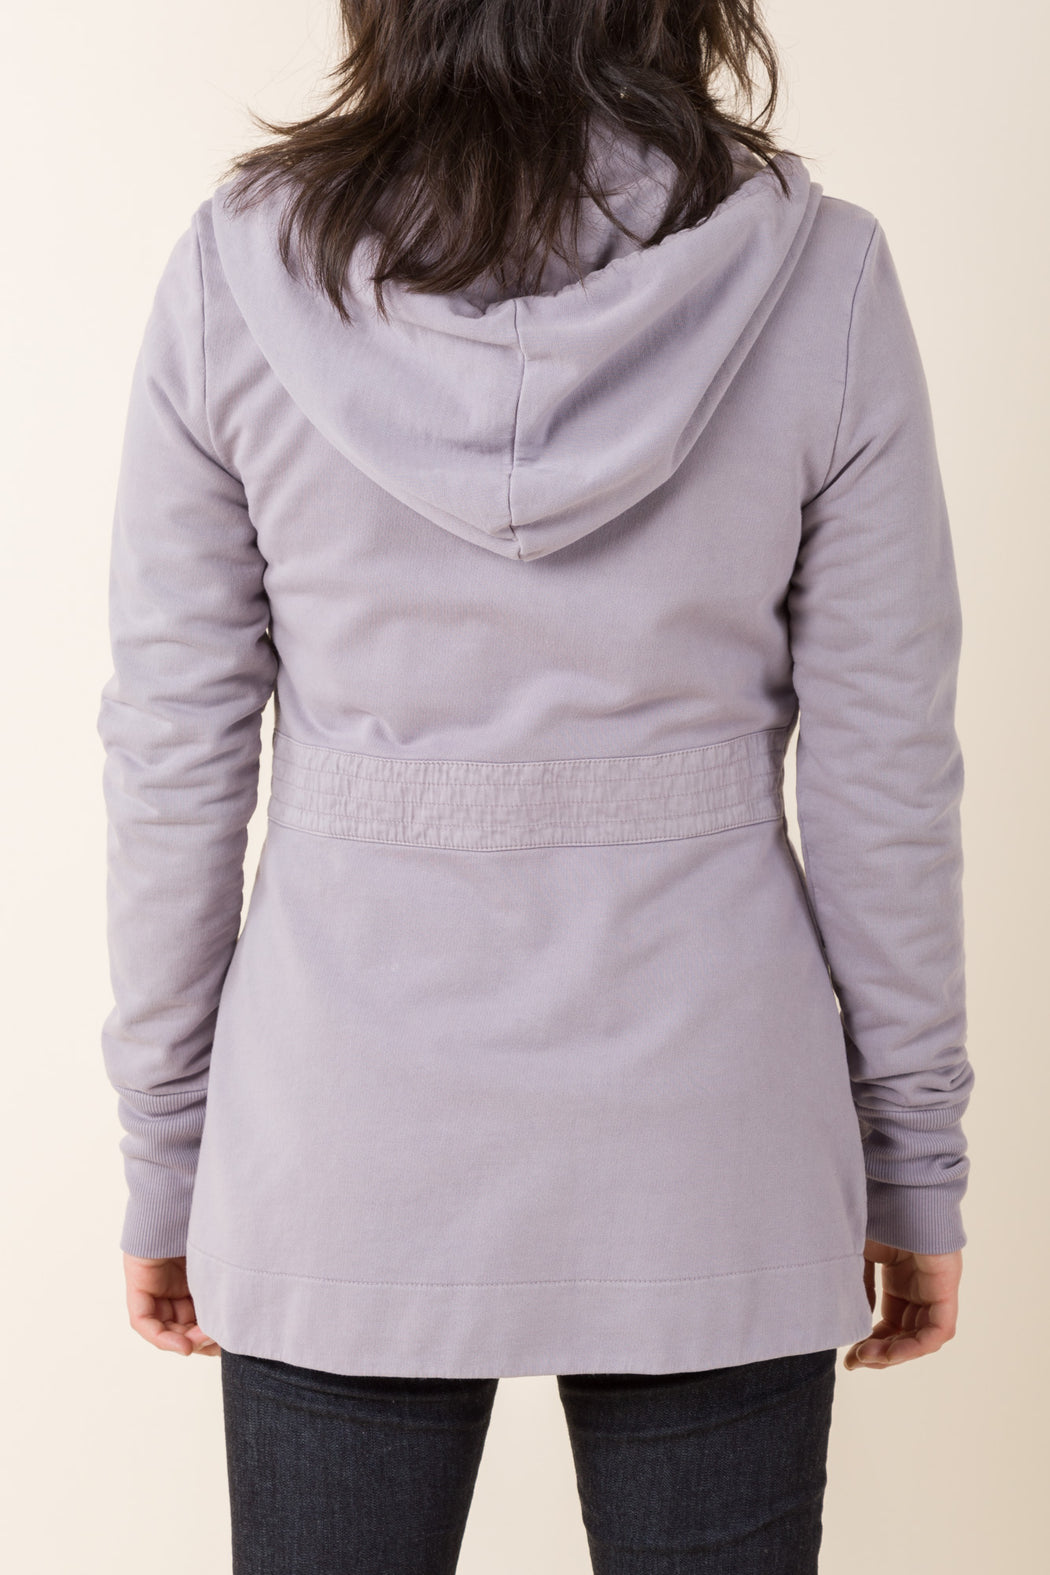 Our Madame X Hoodie is a mid-length hoodie featuring a quilted woven overlay, back belt, with fit and flare shaping and a cinched waist, composed of 100% organic cotton. 